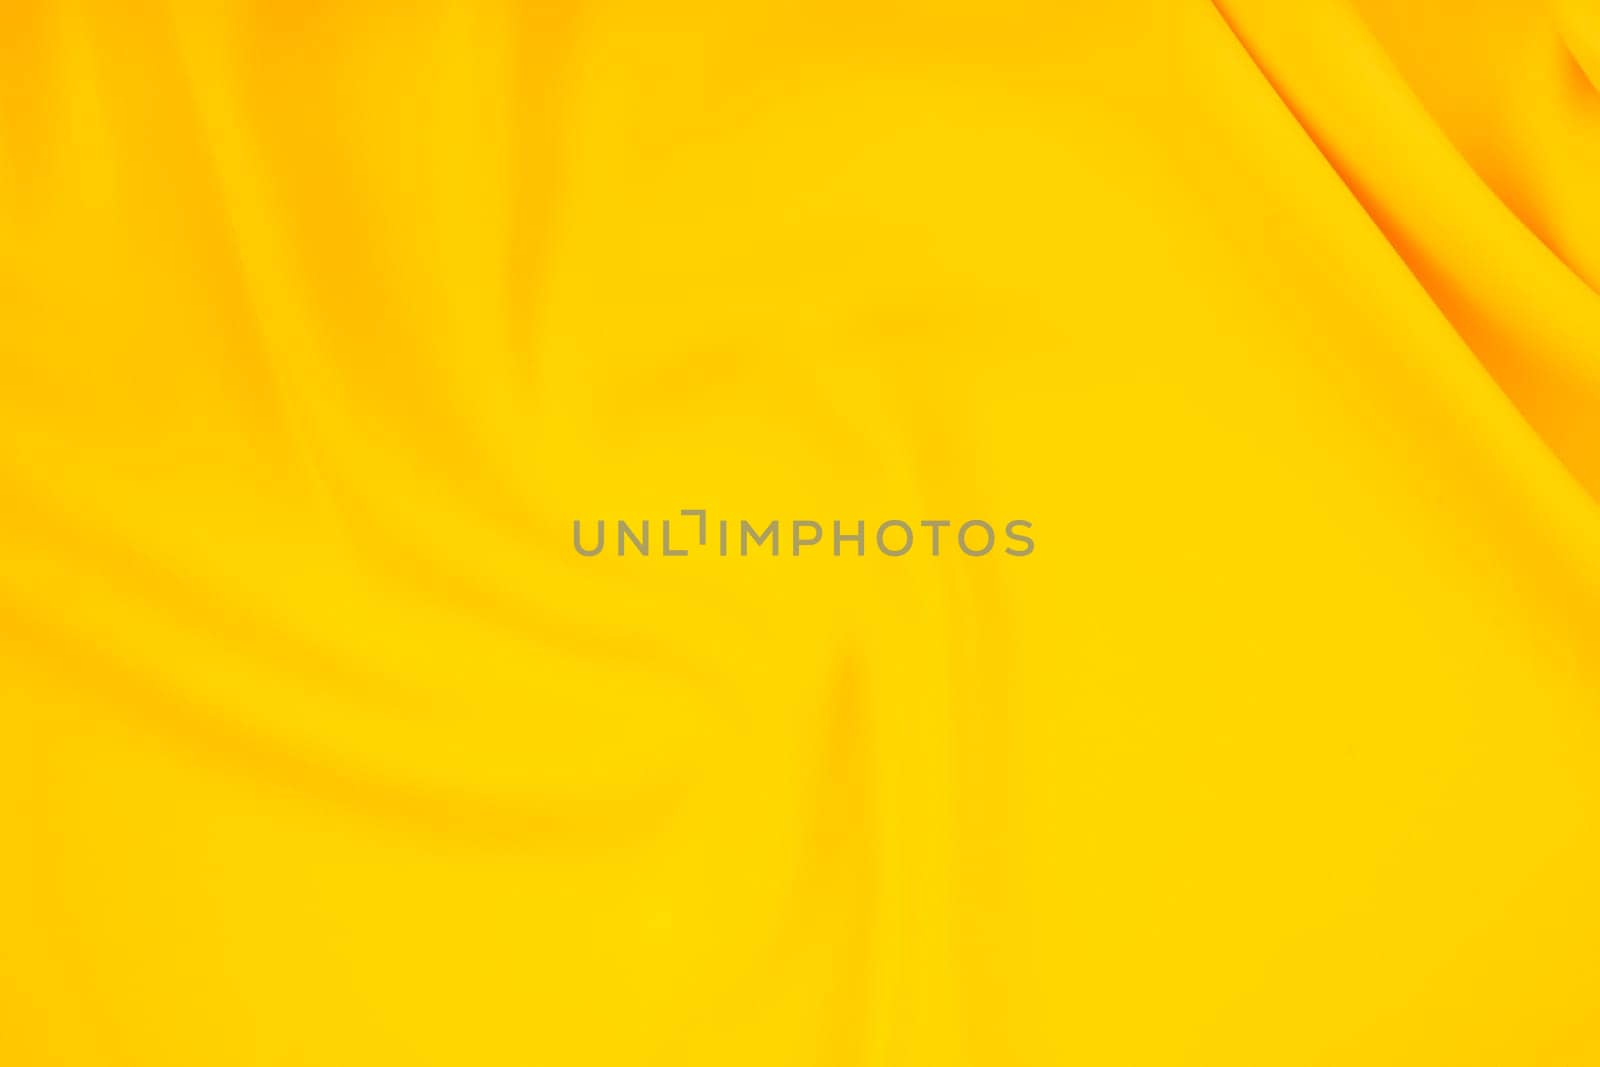 The Yellow fabric silk texture for background. by Gamjai